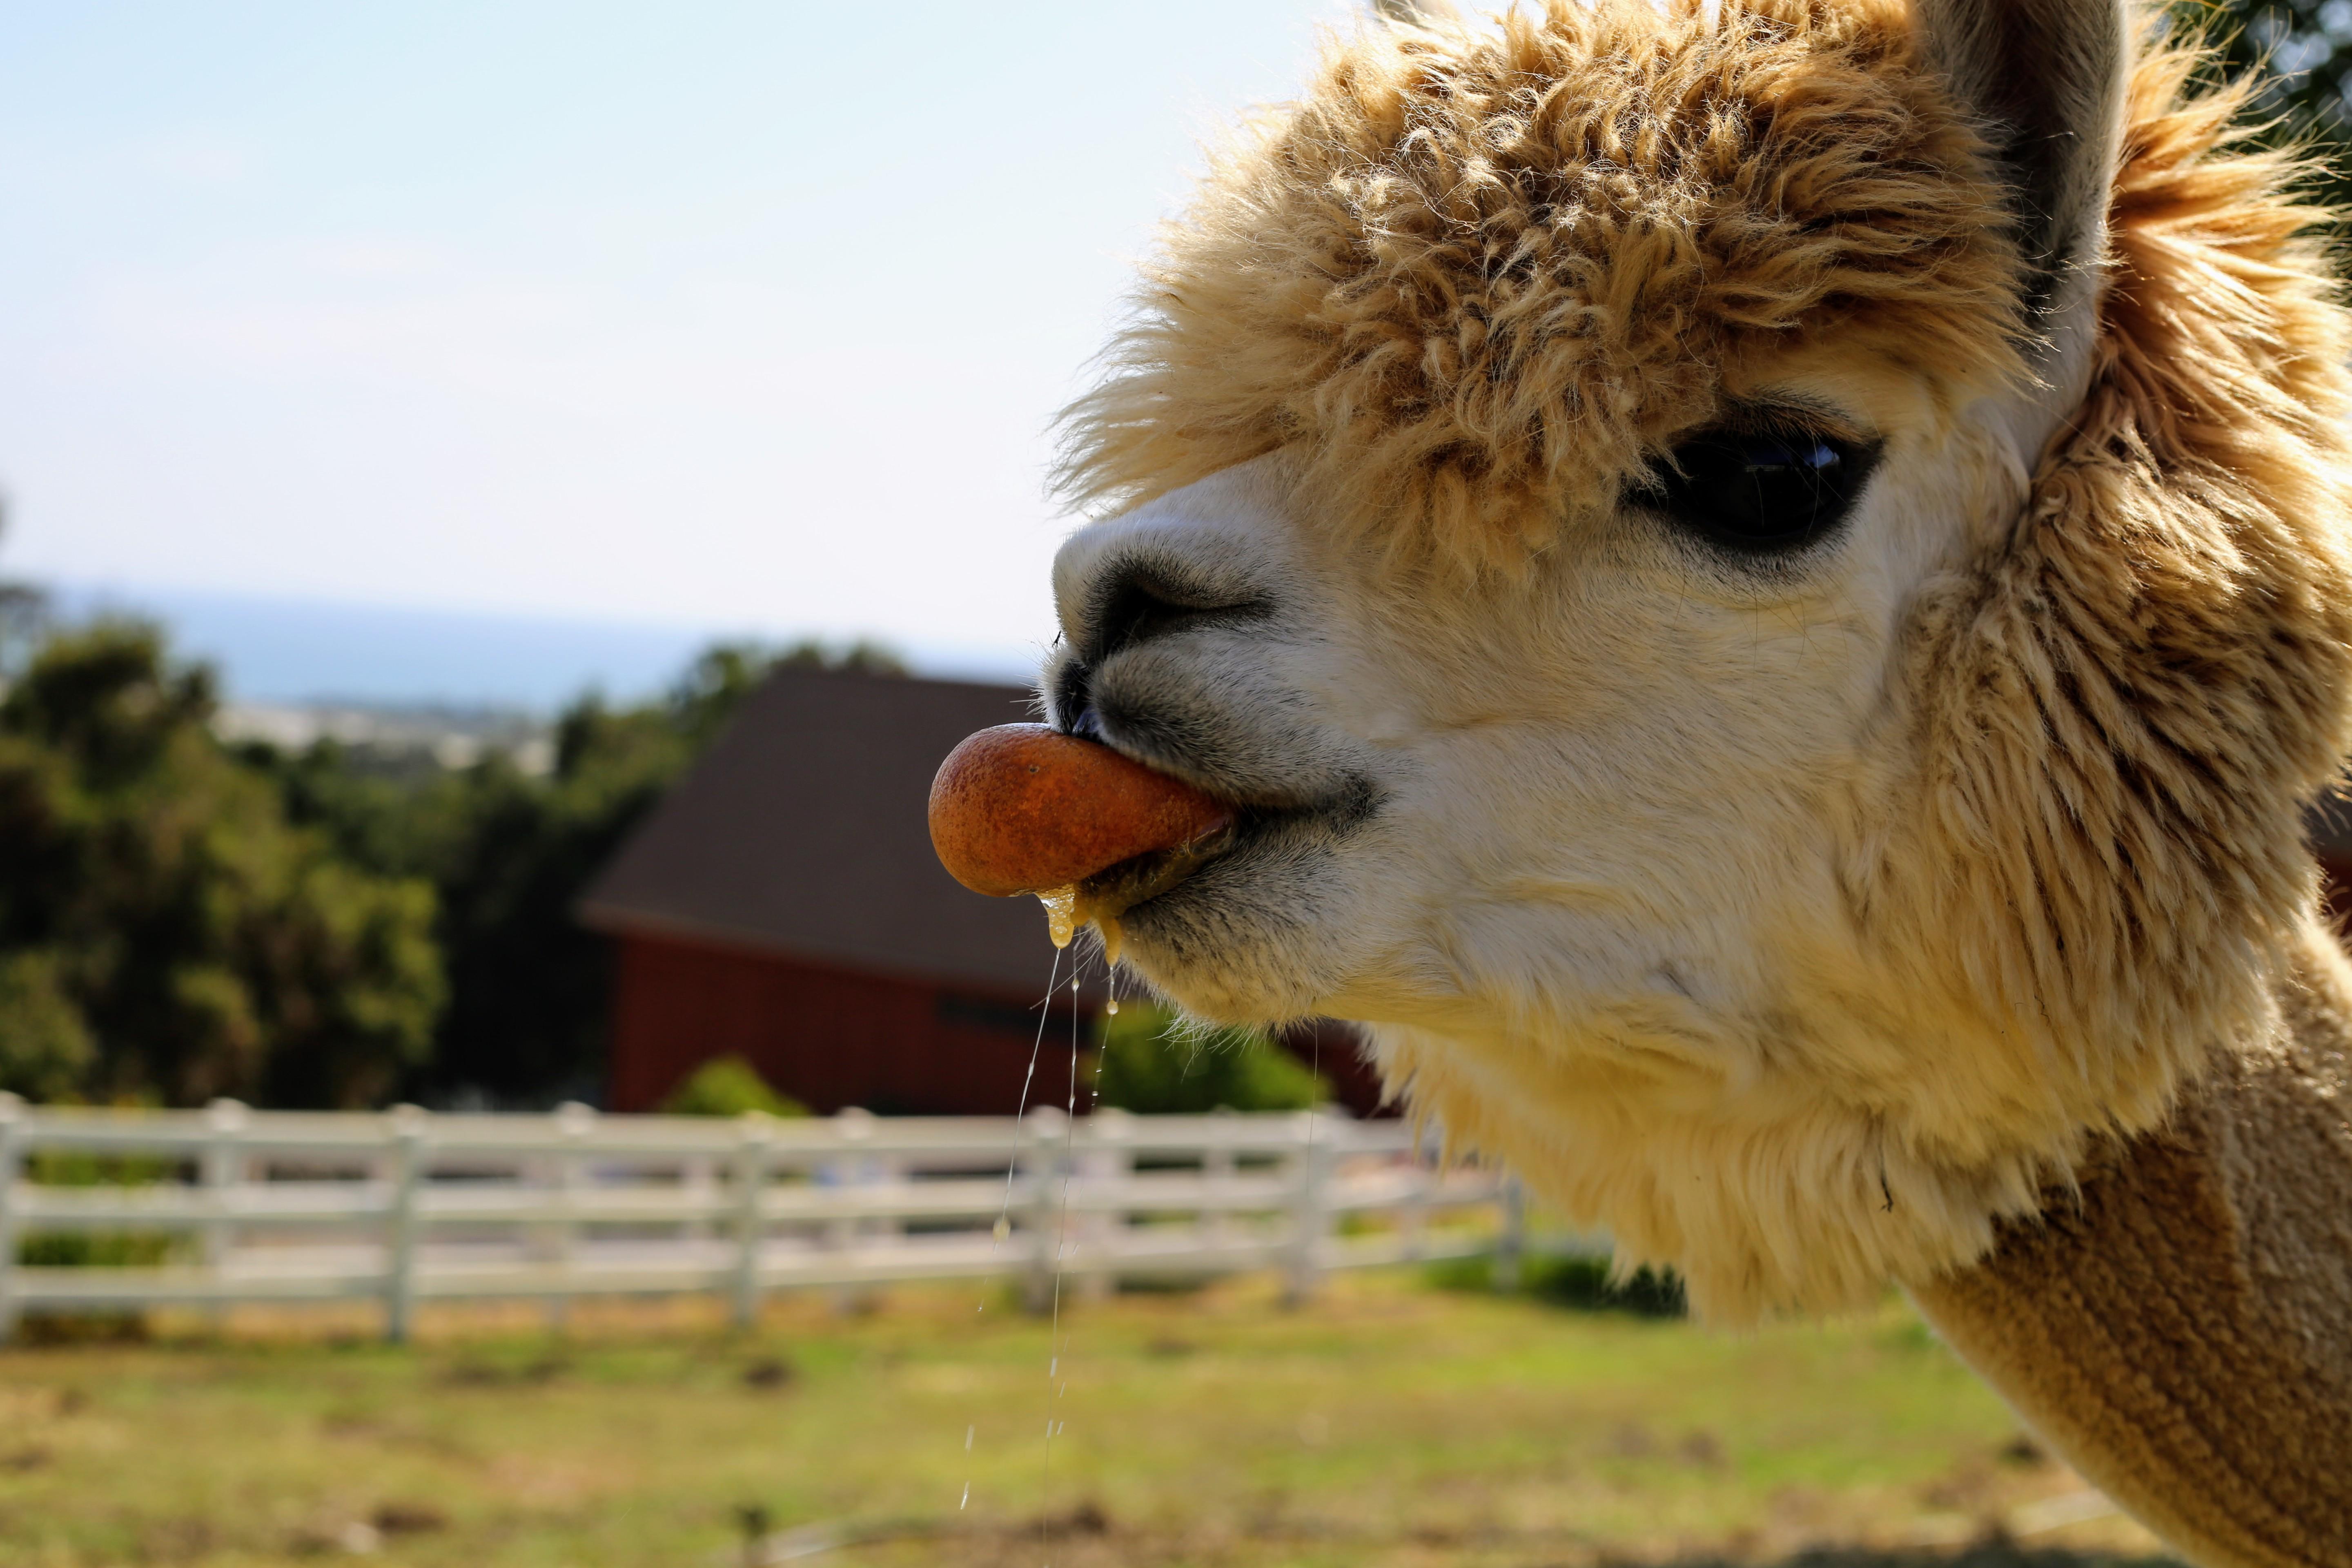 This smiling alpaca eating an orange looks blissfully ...